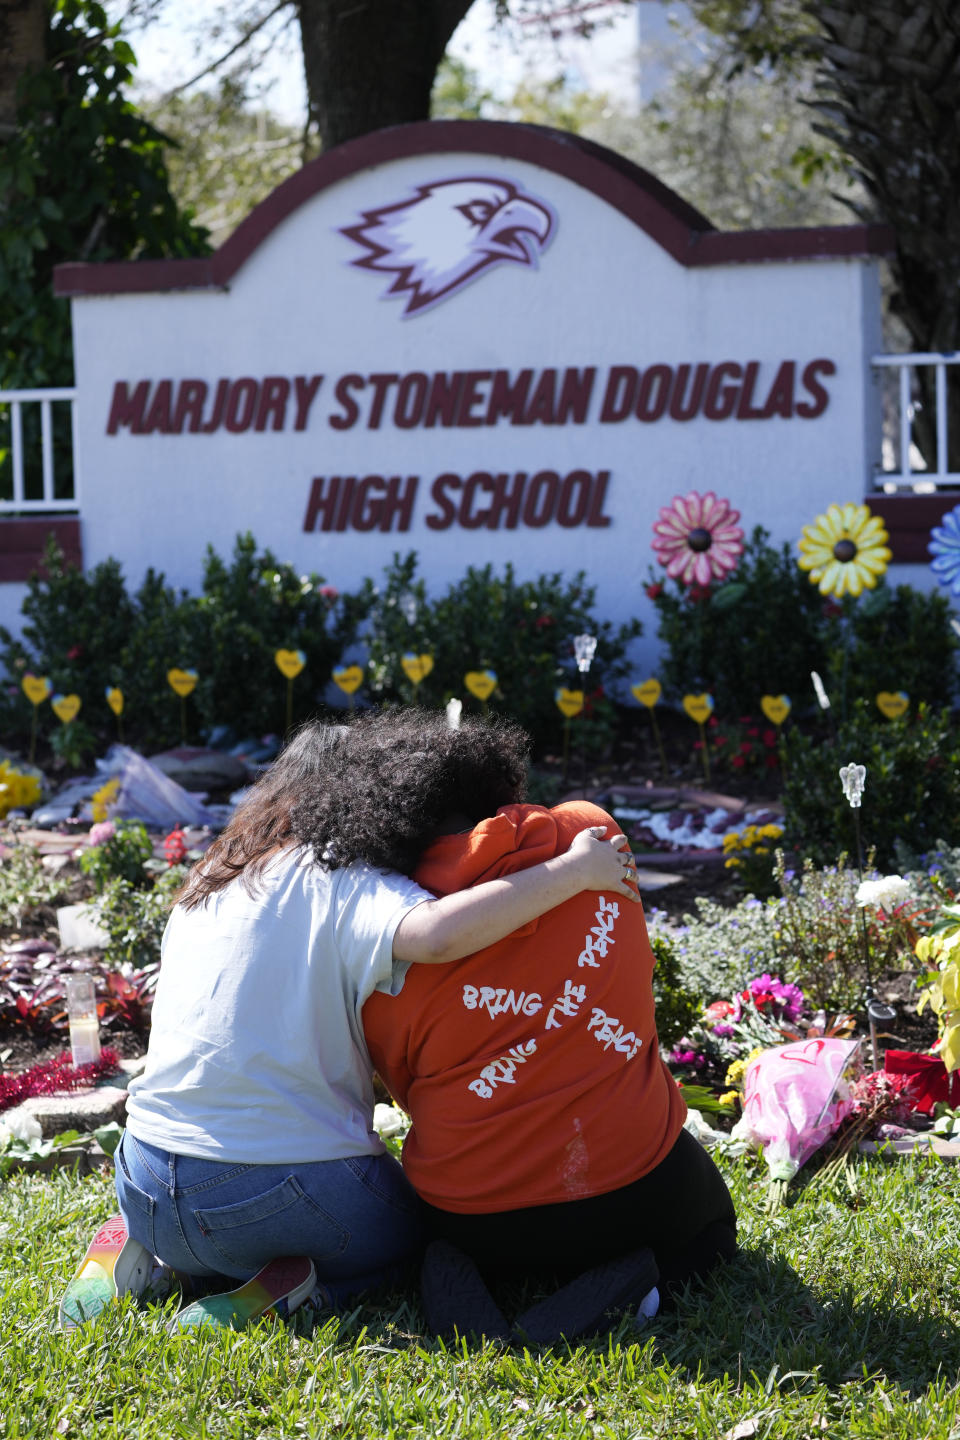 FILE - Mourners take a moment, Tuesday, Feb. 14, 2023, in front of a memorial at Marjory Stoneman Douglas High School in Parkland, Fla. A reenactment of the 2018 massacre that left 17 dead, 17 wounded and hundreds emotionally traumatized, is scheduled to be conducted Friday, Aug. 4, 2023, as part of lawsuits filed by the victims' families and the injured. (AP Photo/Wilfredo Lee, File)